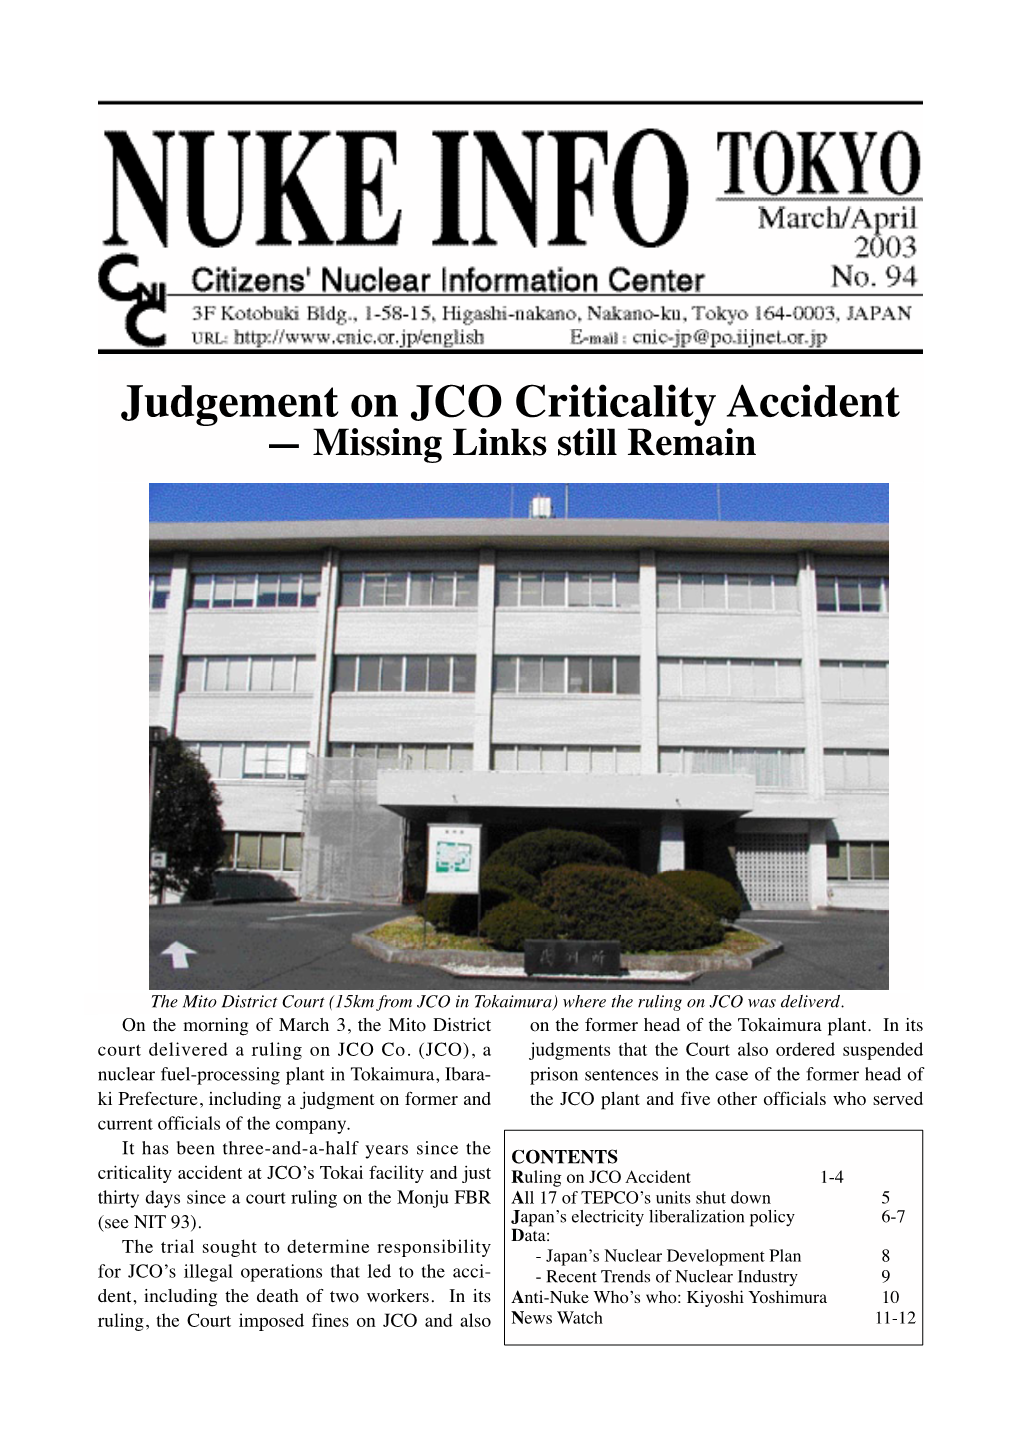 Judgement on JCO Criticality Accident — Missing Links Still Remain